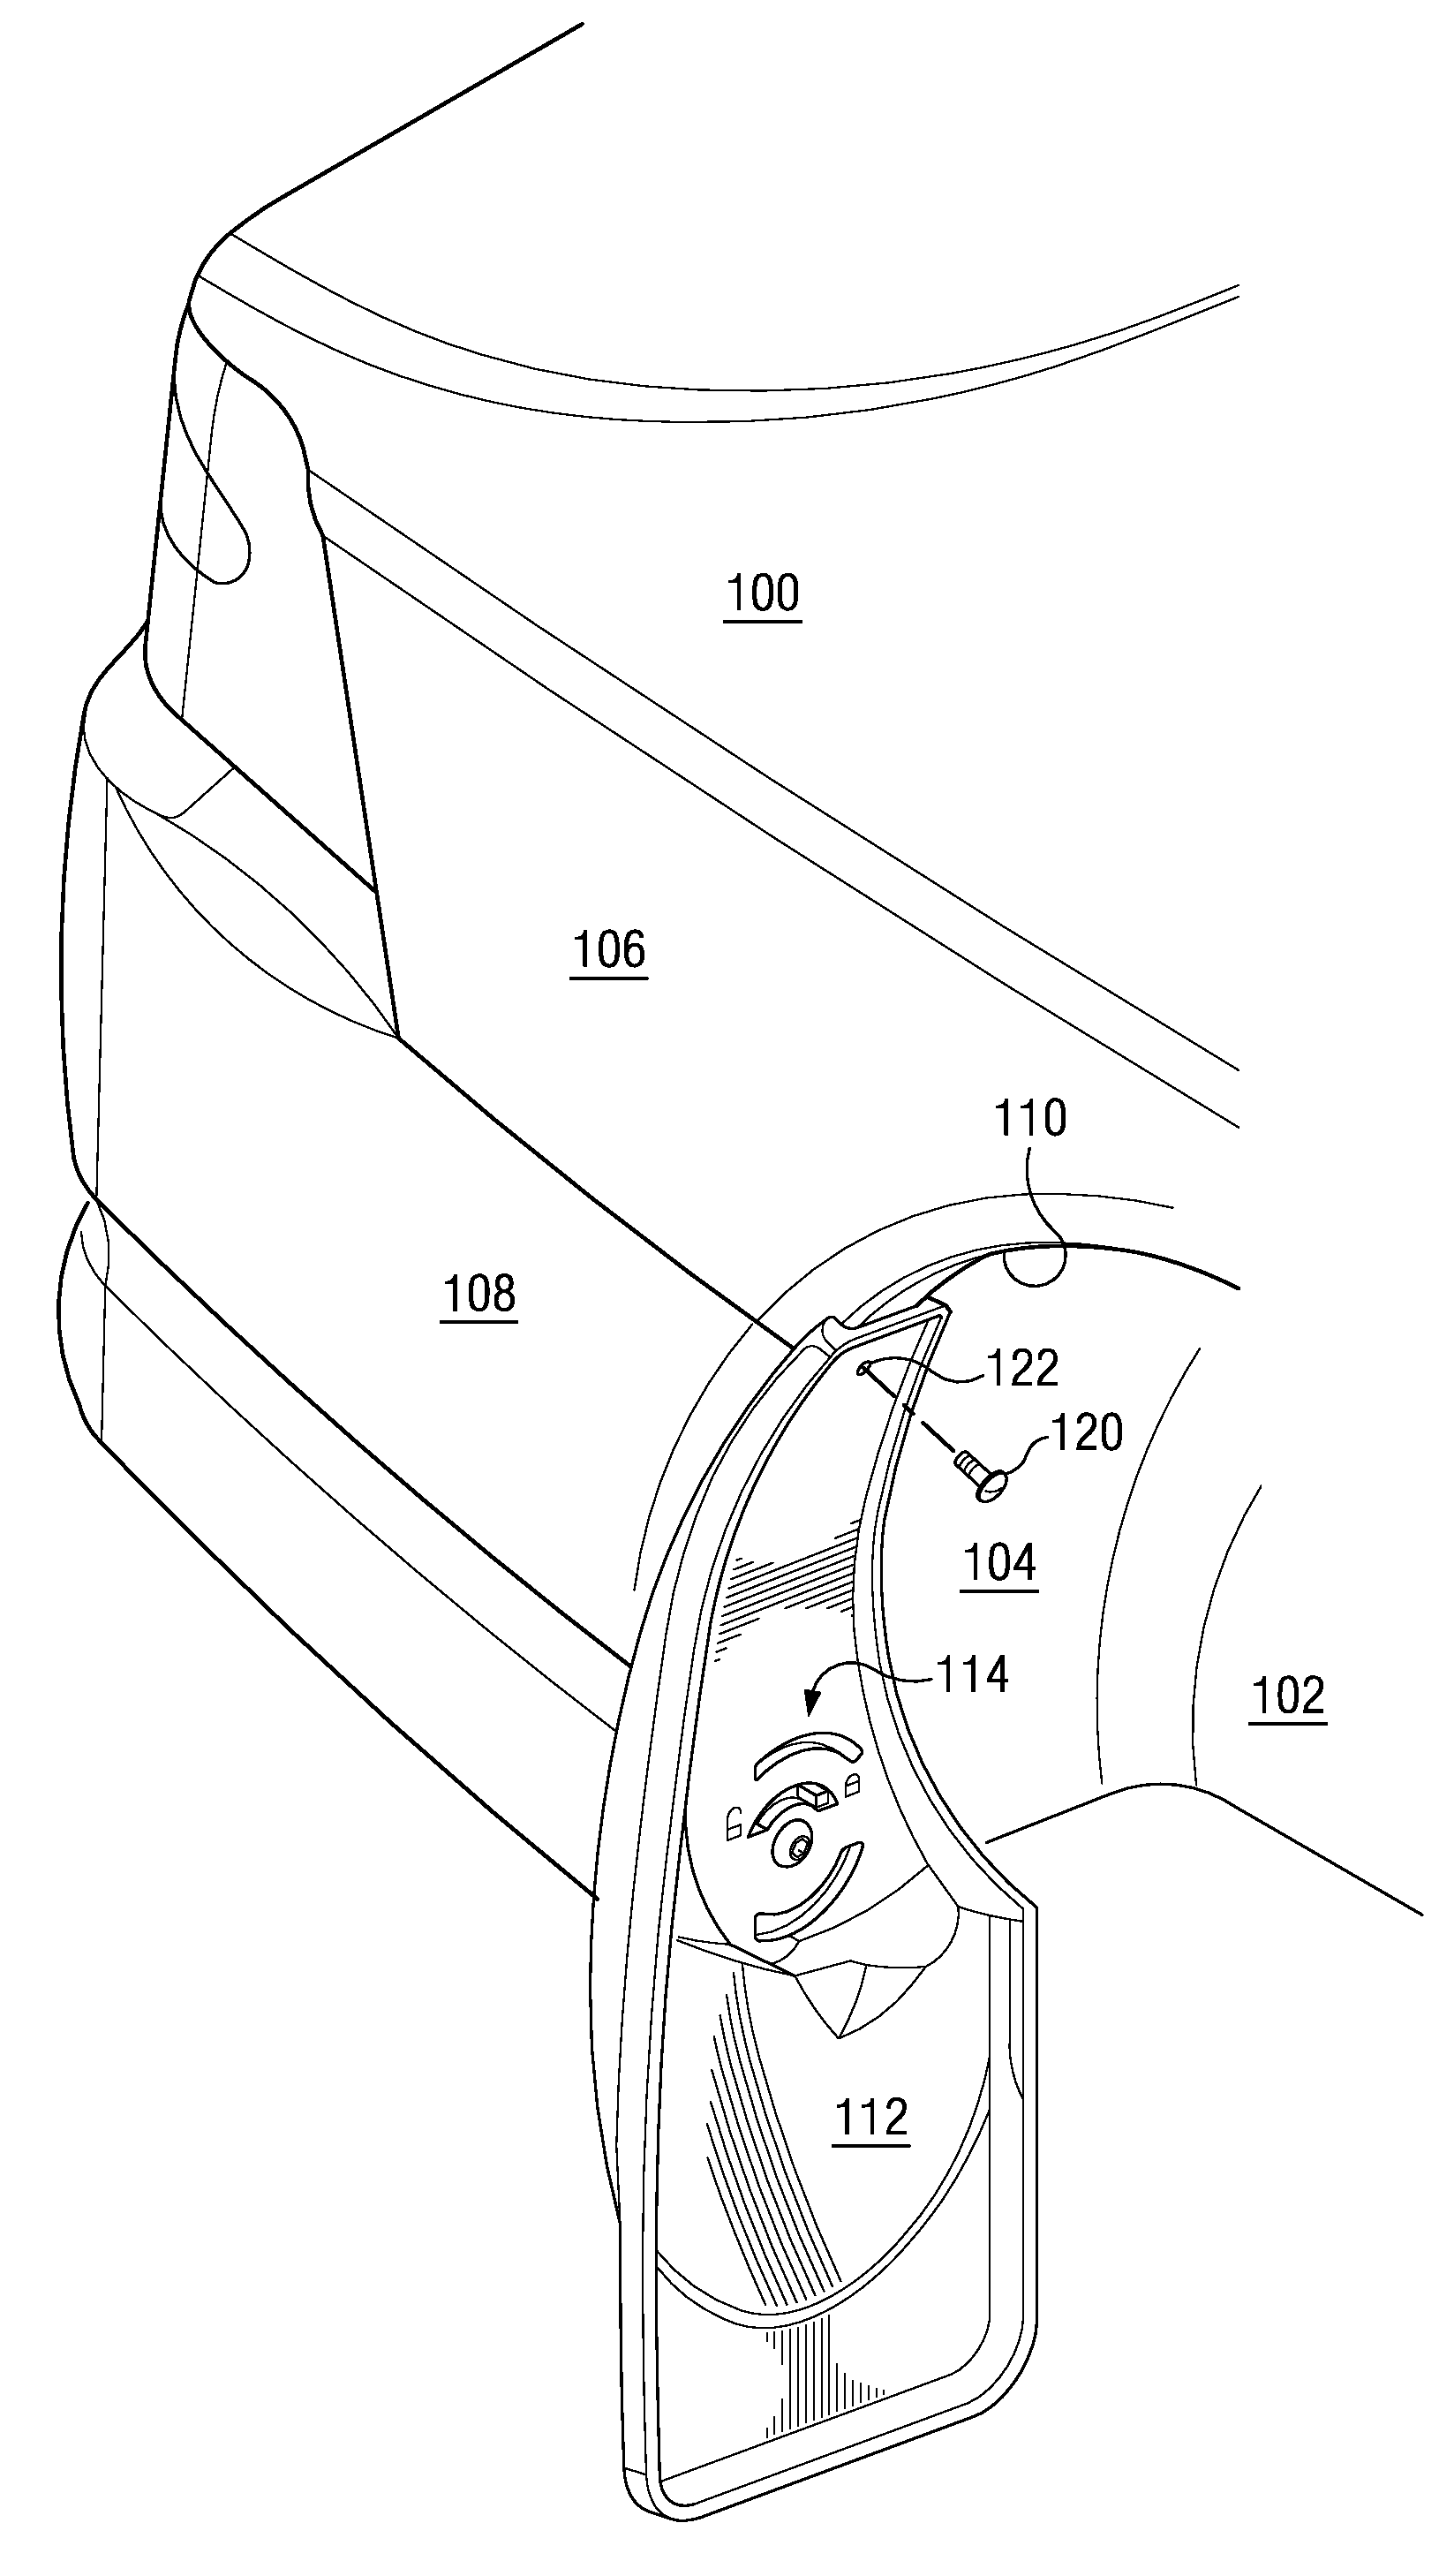 Vehicle mud flap with fender fold clamp